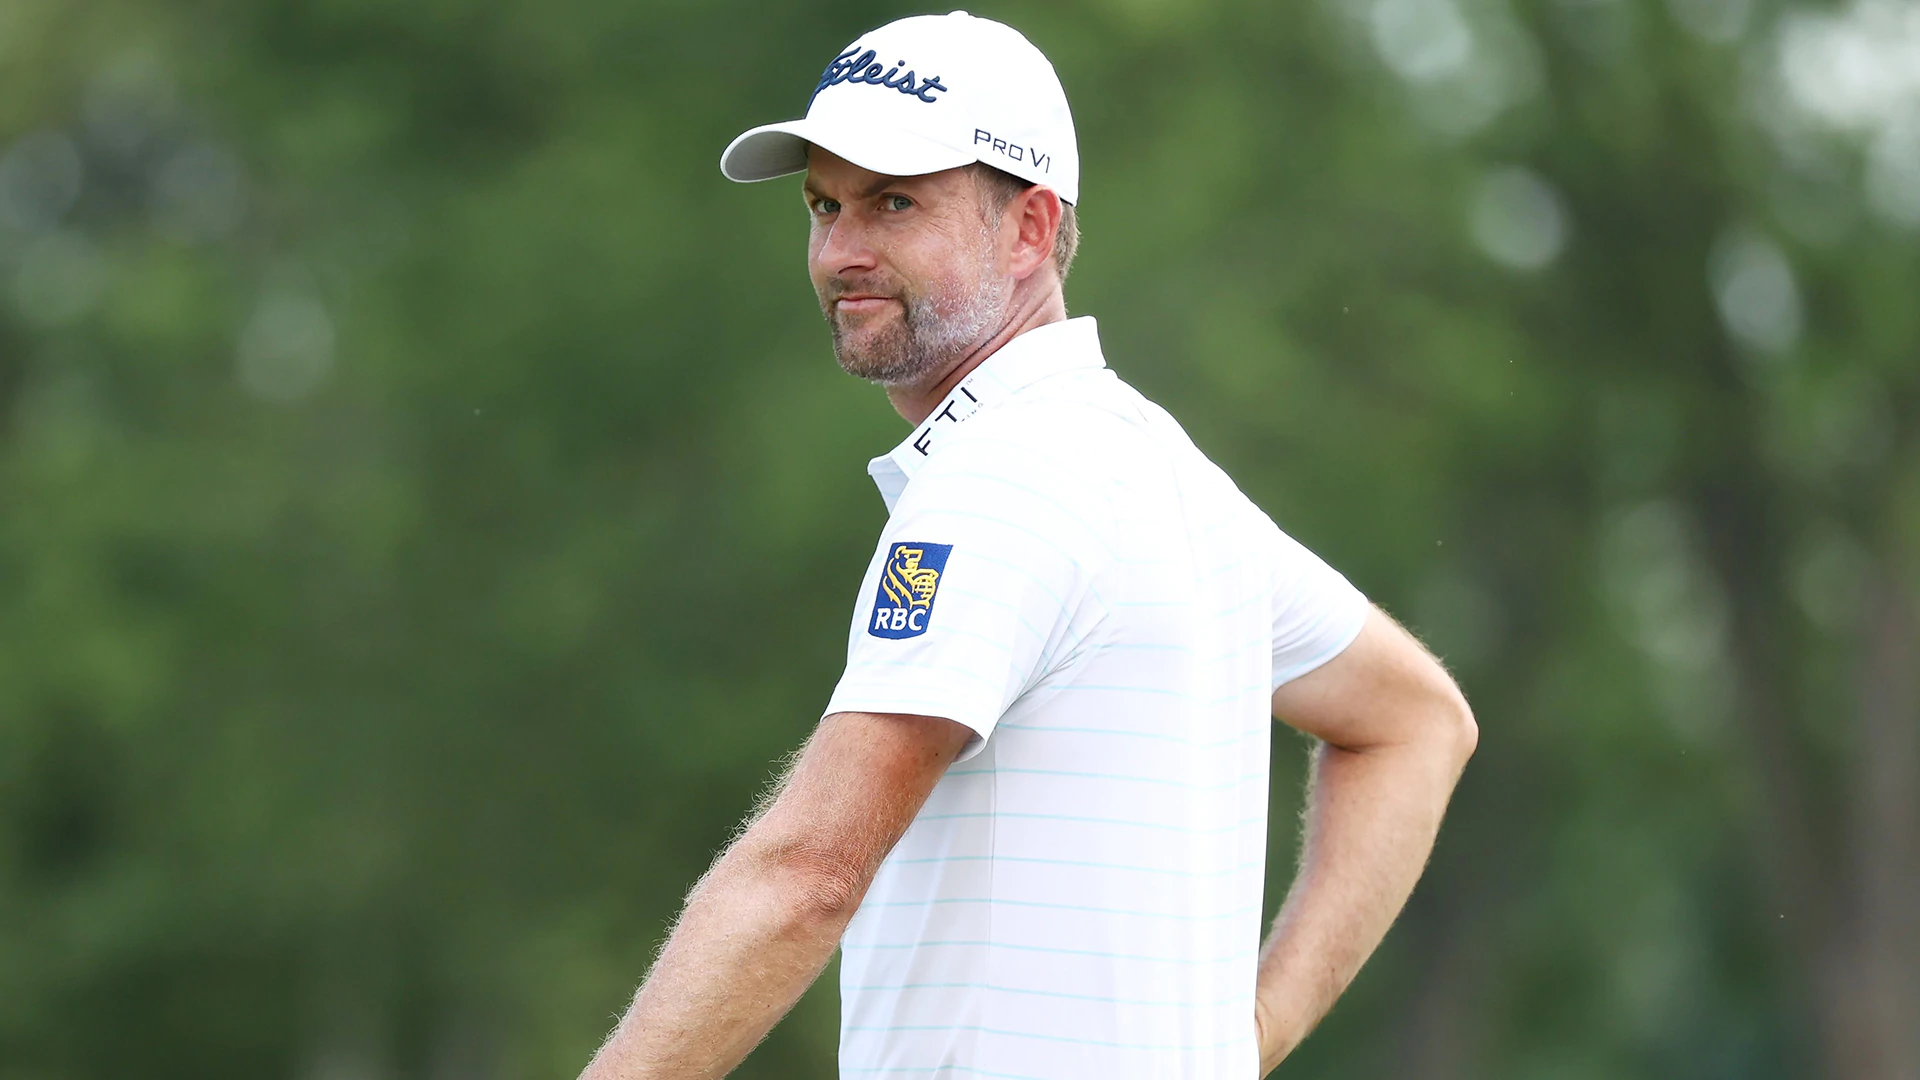 With mind not racing in Motor City, Webb Simpson eyes victory No. 3